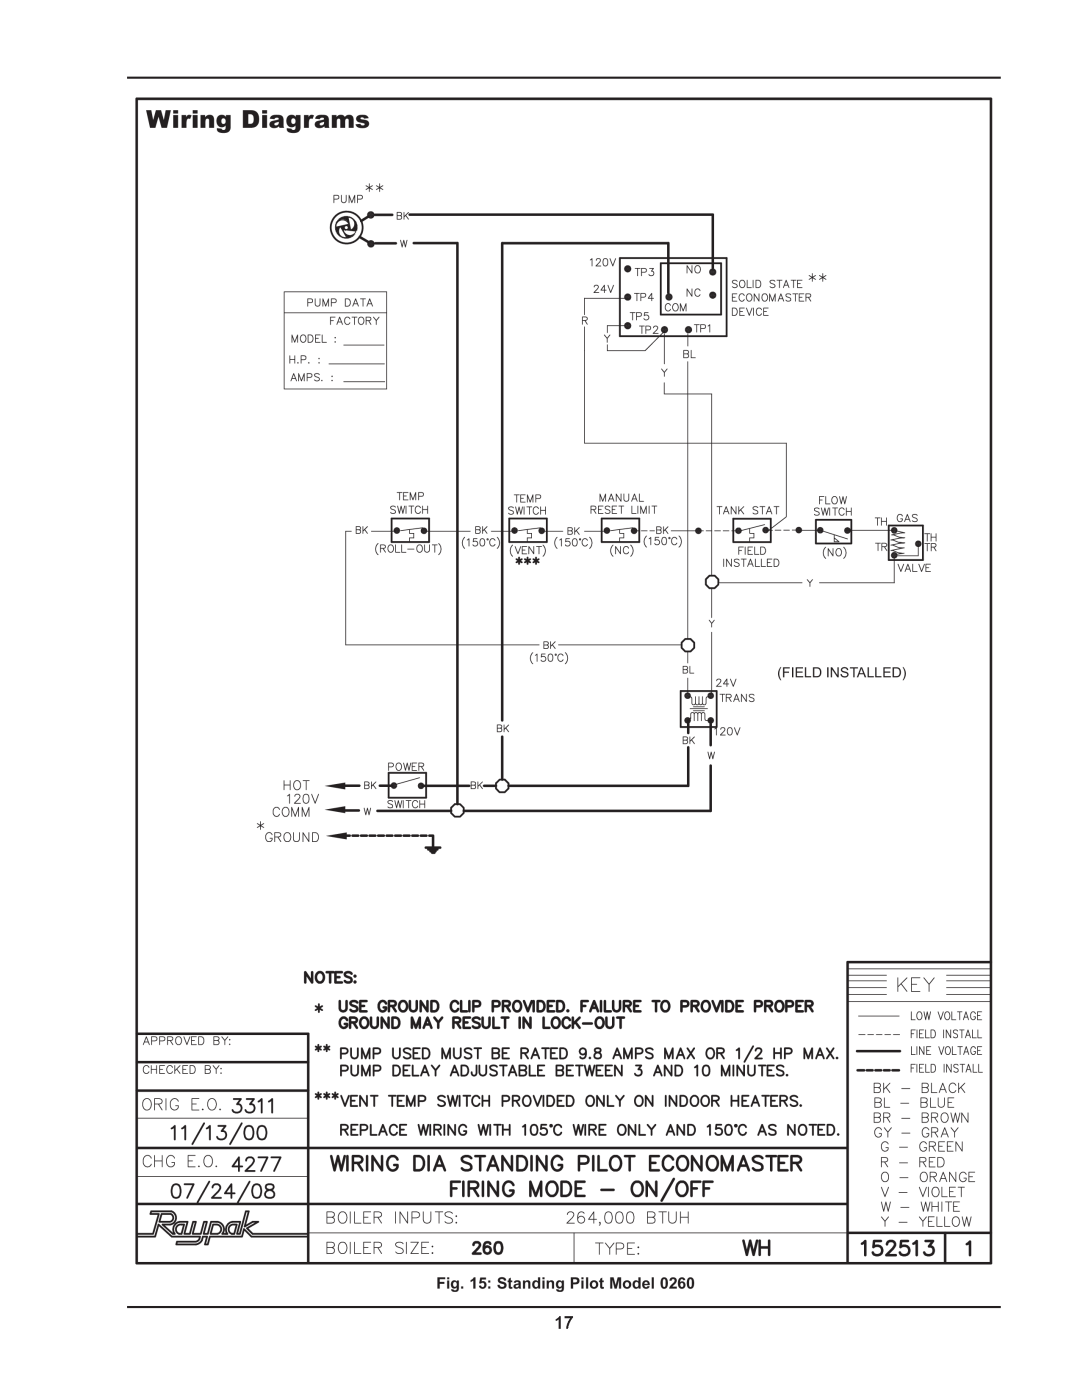 Raypak 2600401 operating instructions Wiring Diagrams, Standing Pilot Model, Field Installed 